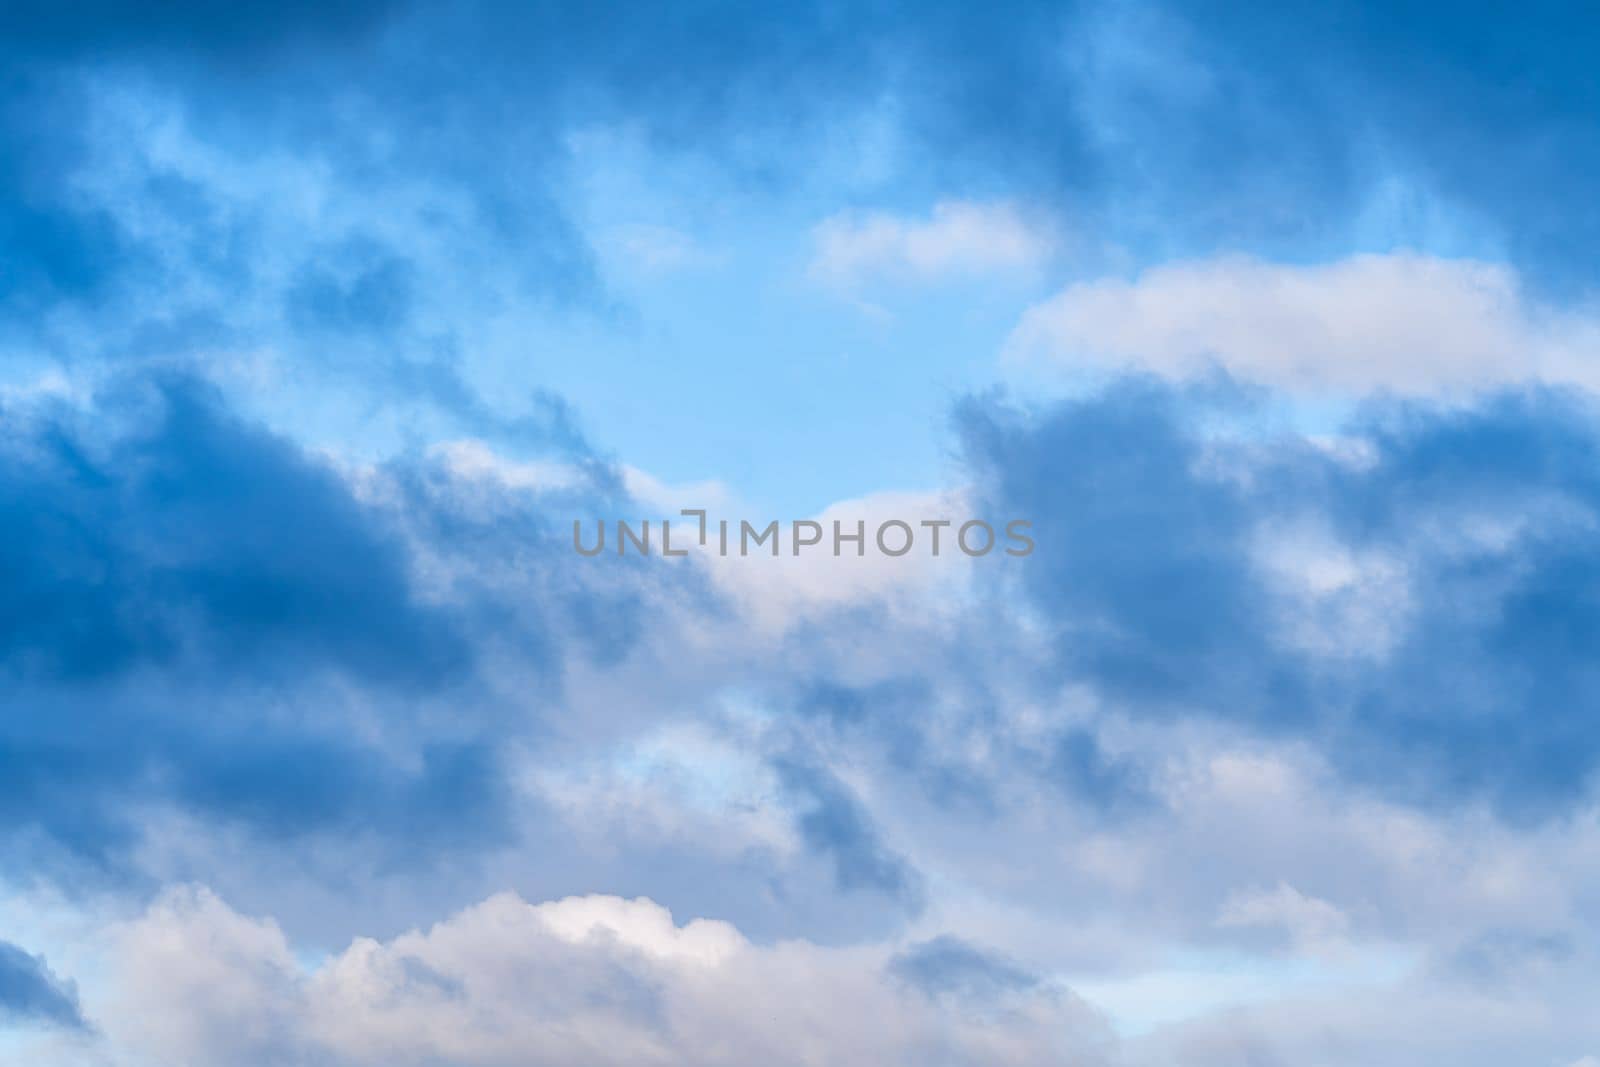 blue sky with clouds. wallpaper and background. High quality photo